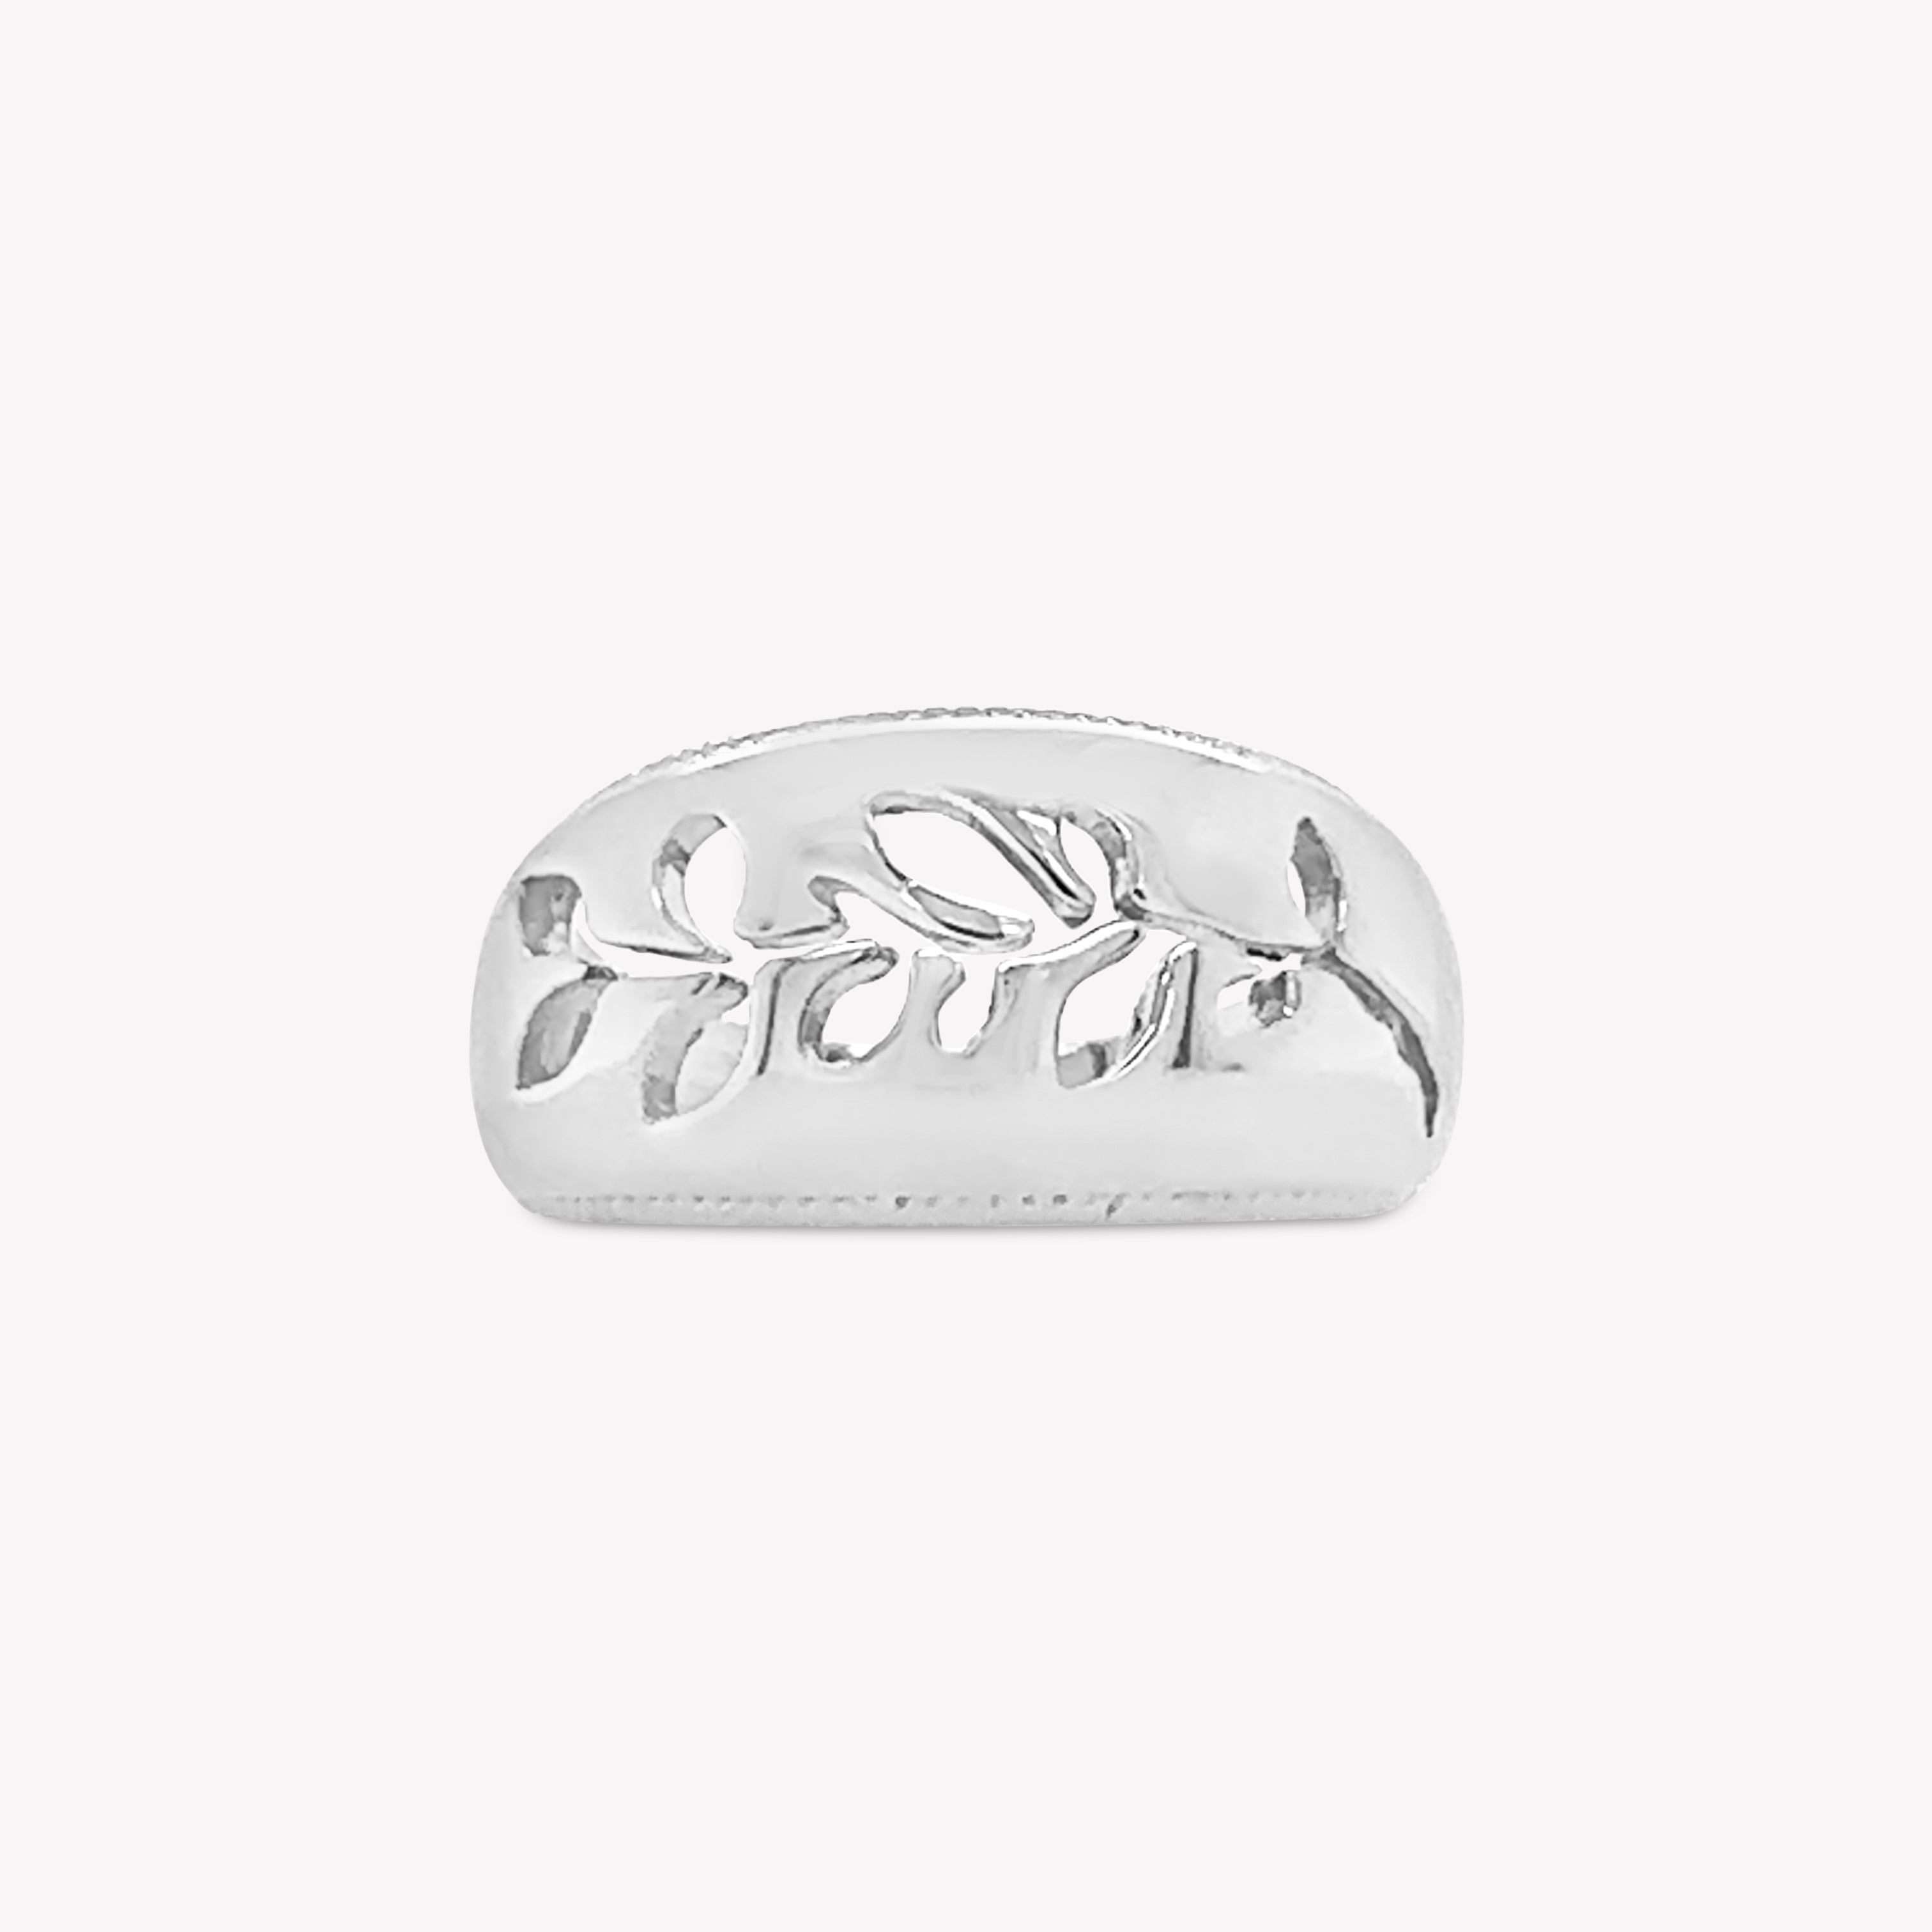 Intricately designed Olive Branch Ring in sterling silver from the Rooted Collection by Rizen Jewelry.